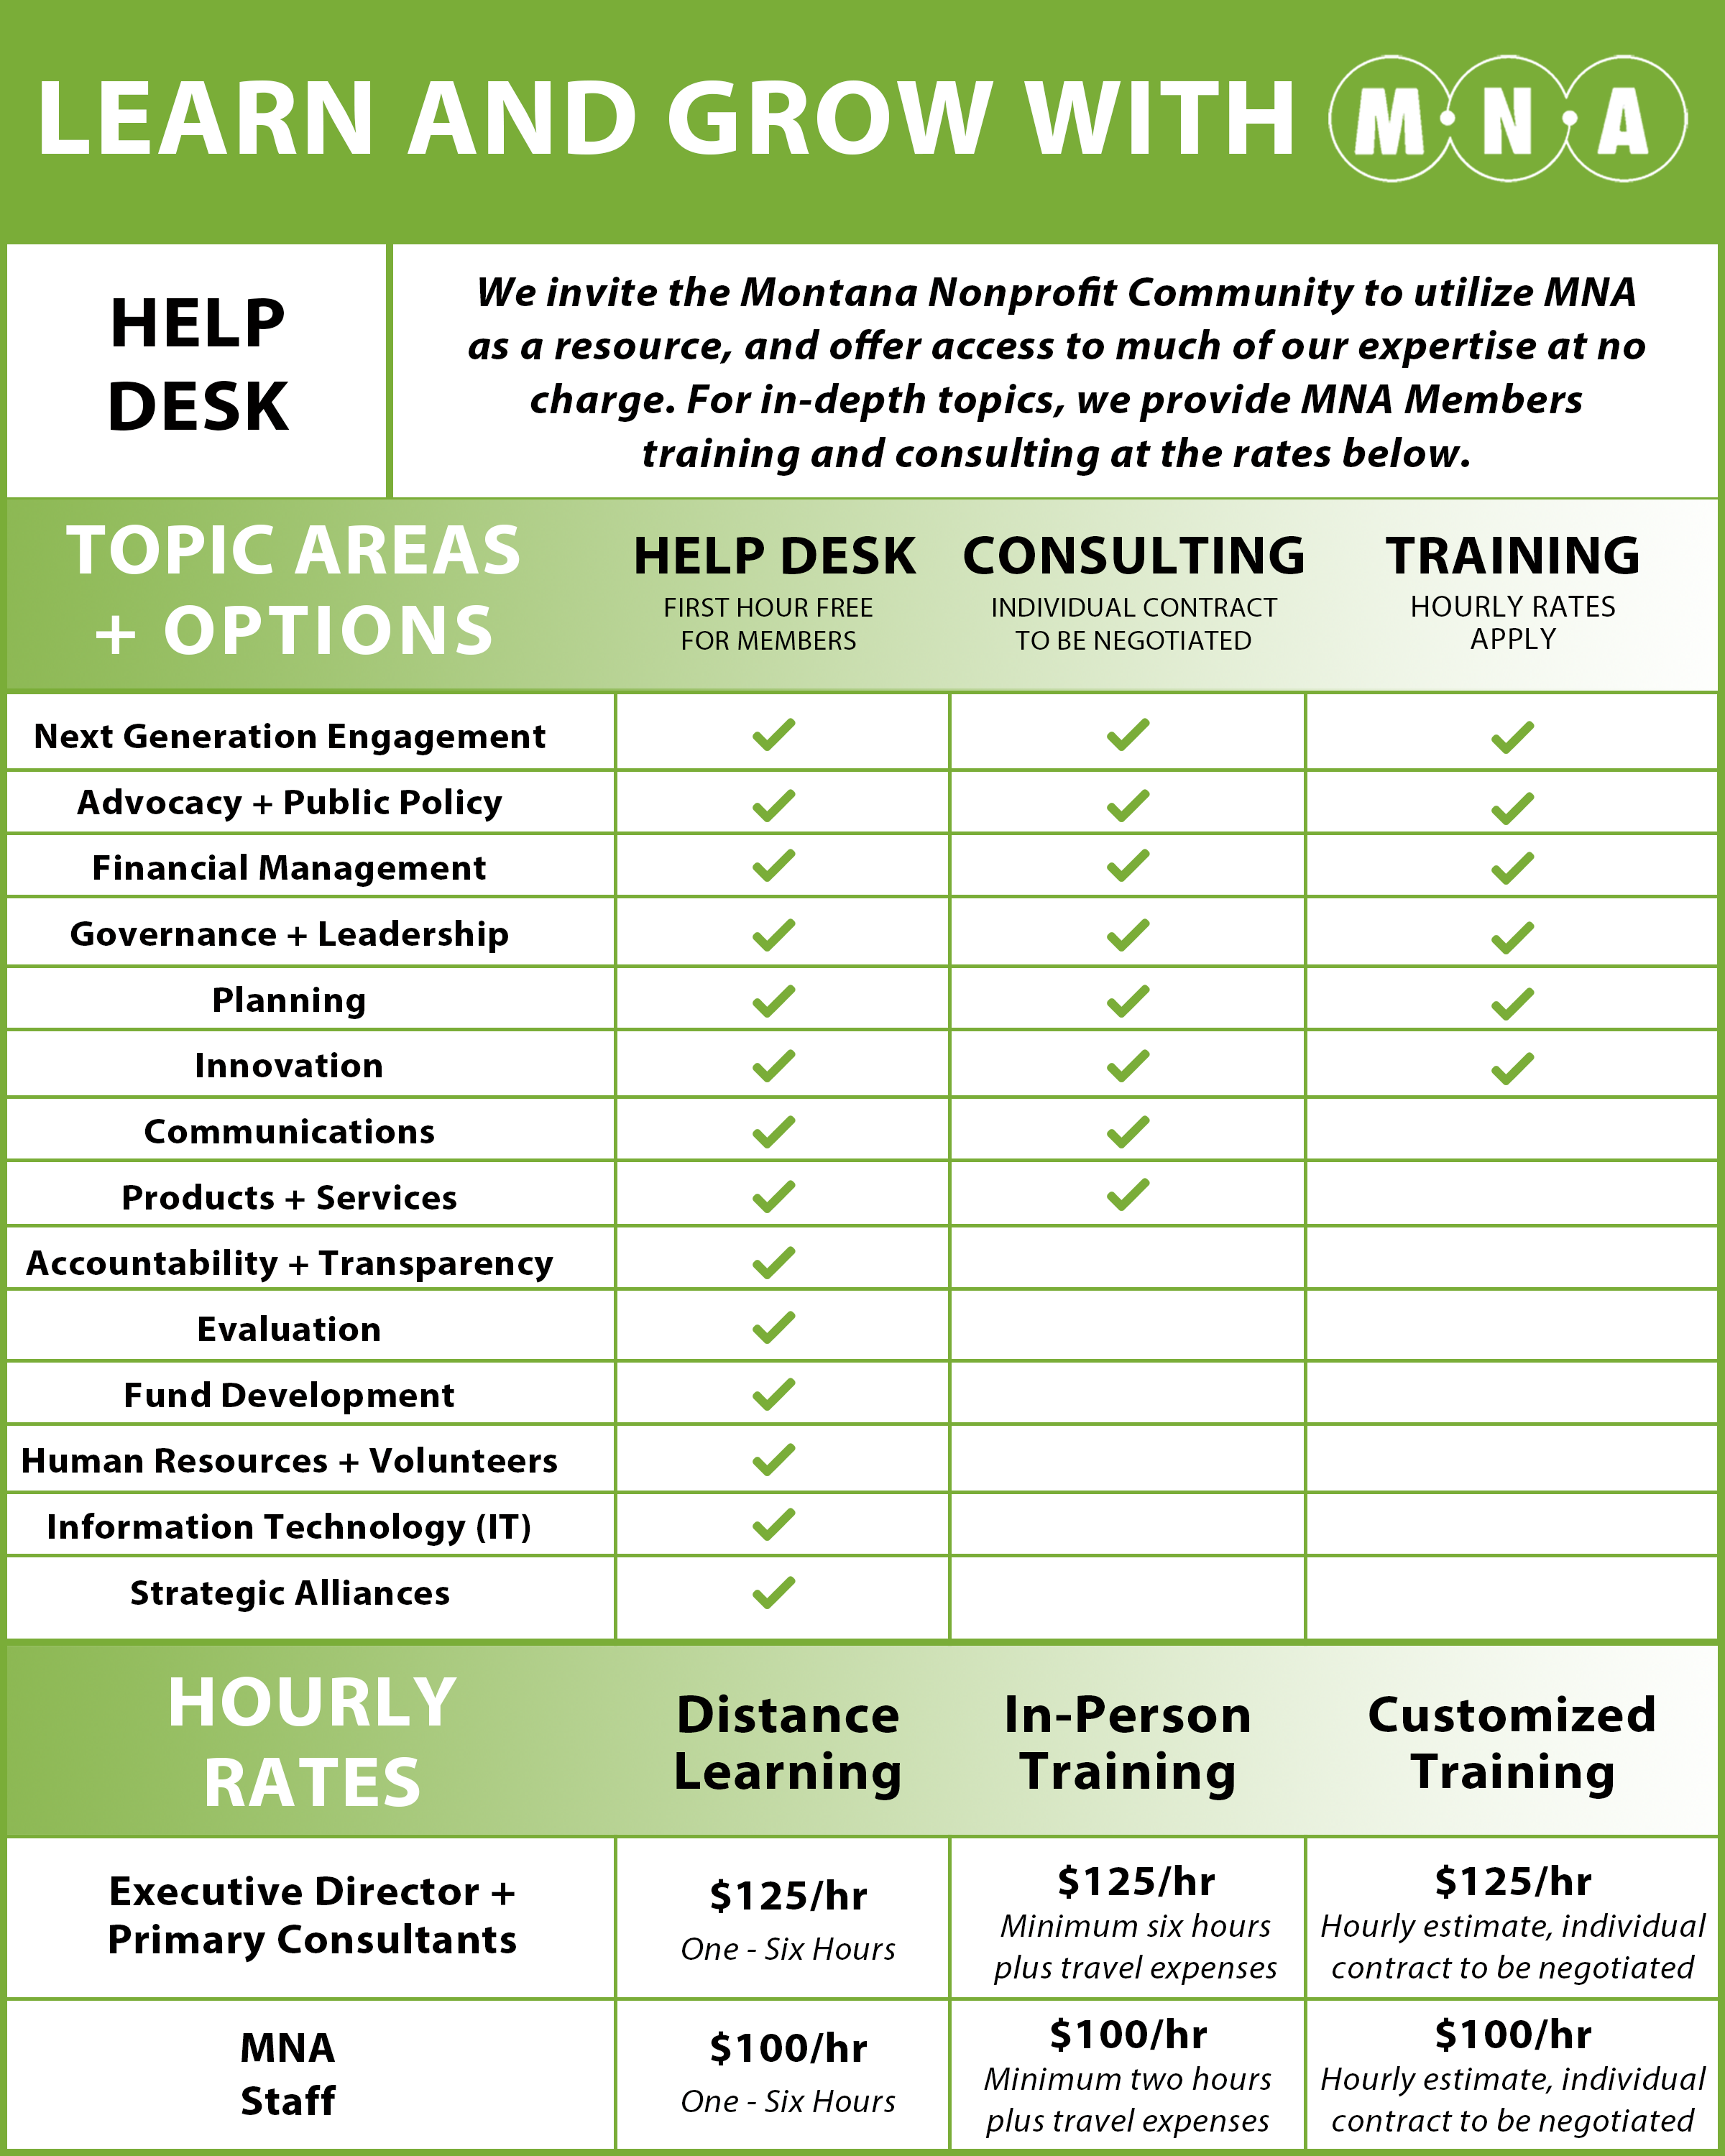 MNA offers help, training, and consulting in a variety of nonprofit topics. Free hour provided to MNA Members, and rates start at $100/Hour after that.